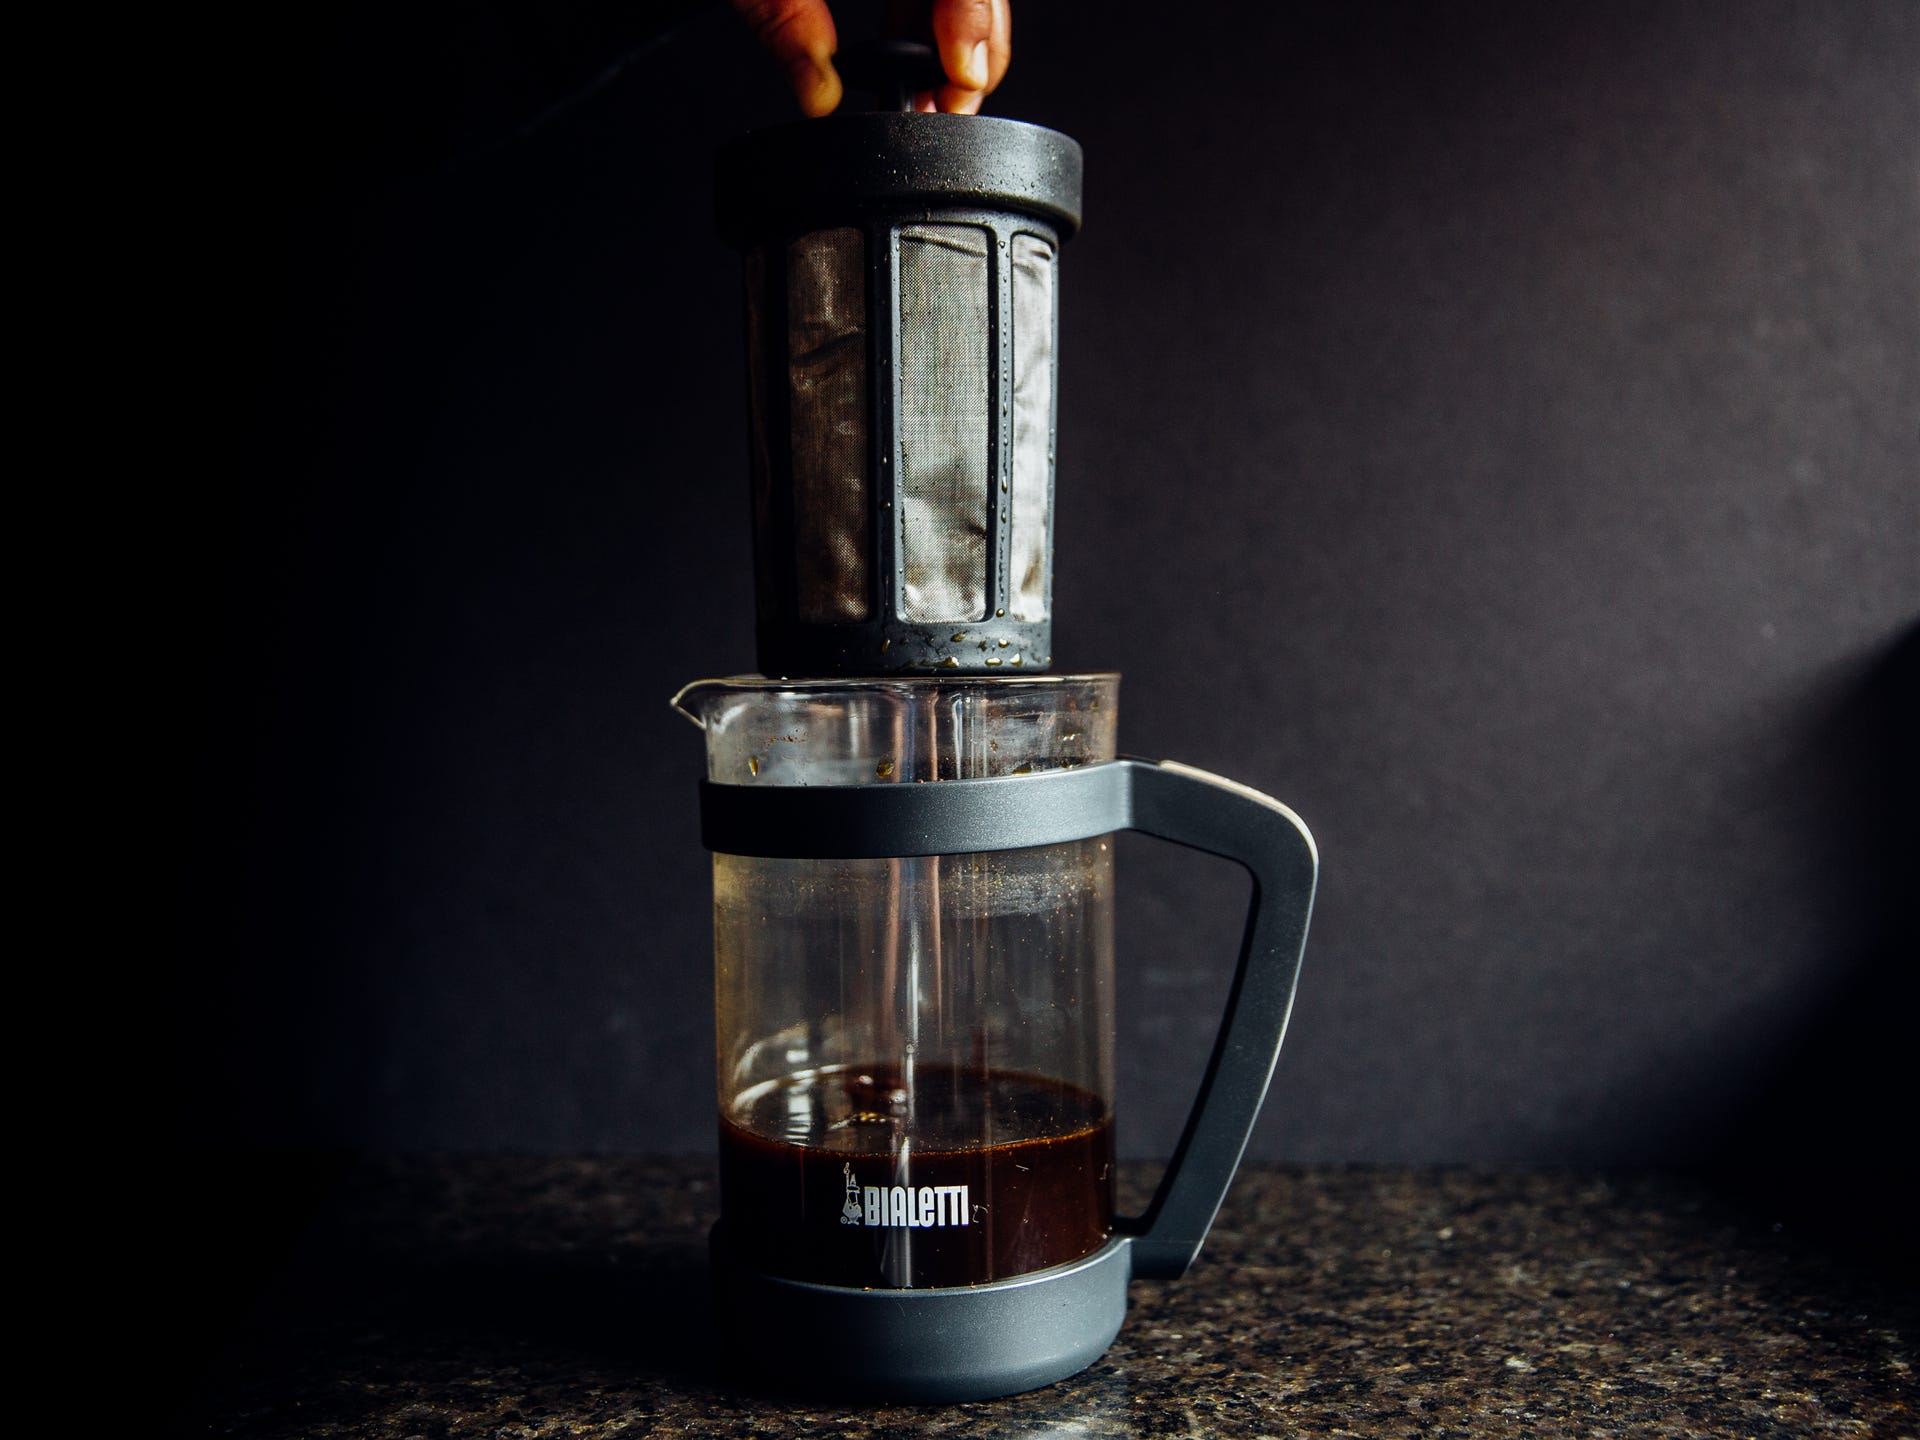 bialetti-cold-brew-product-photos-5.jpg